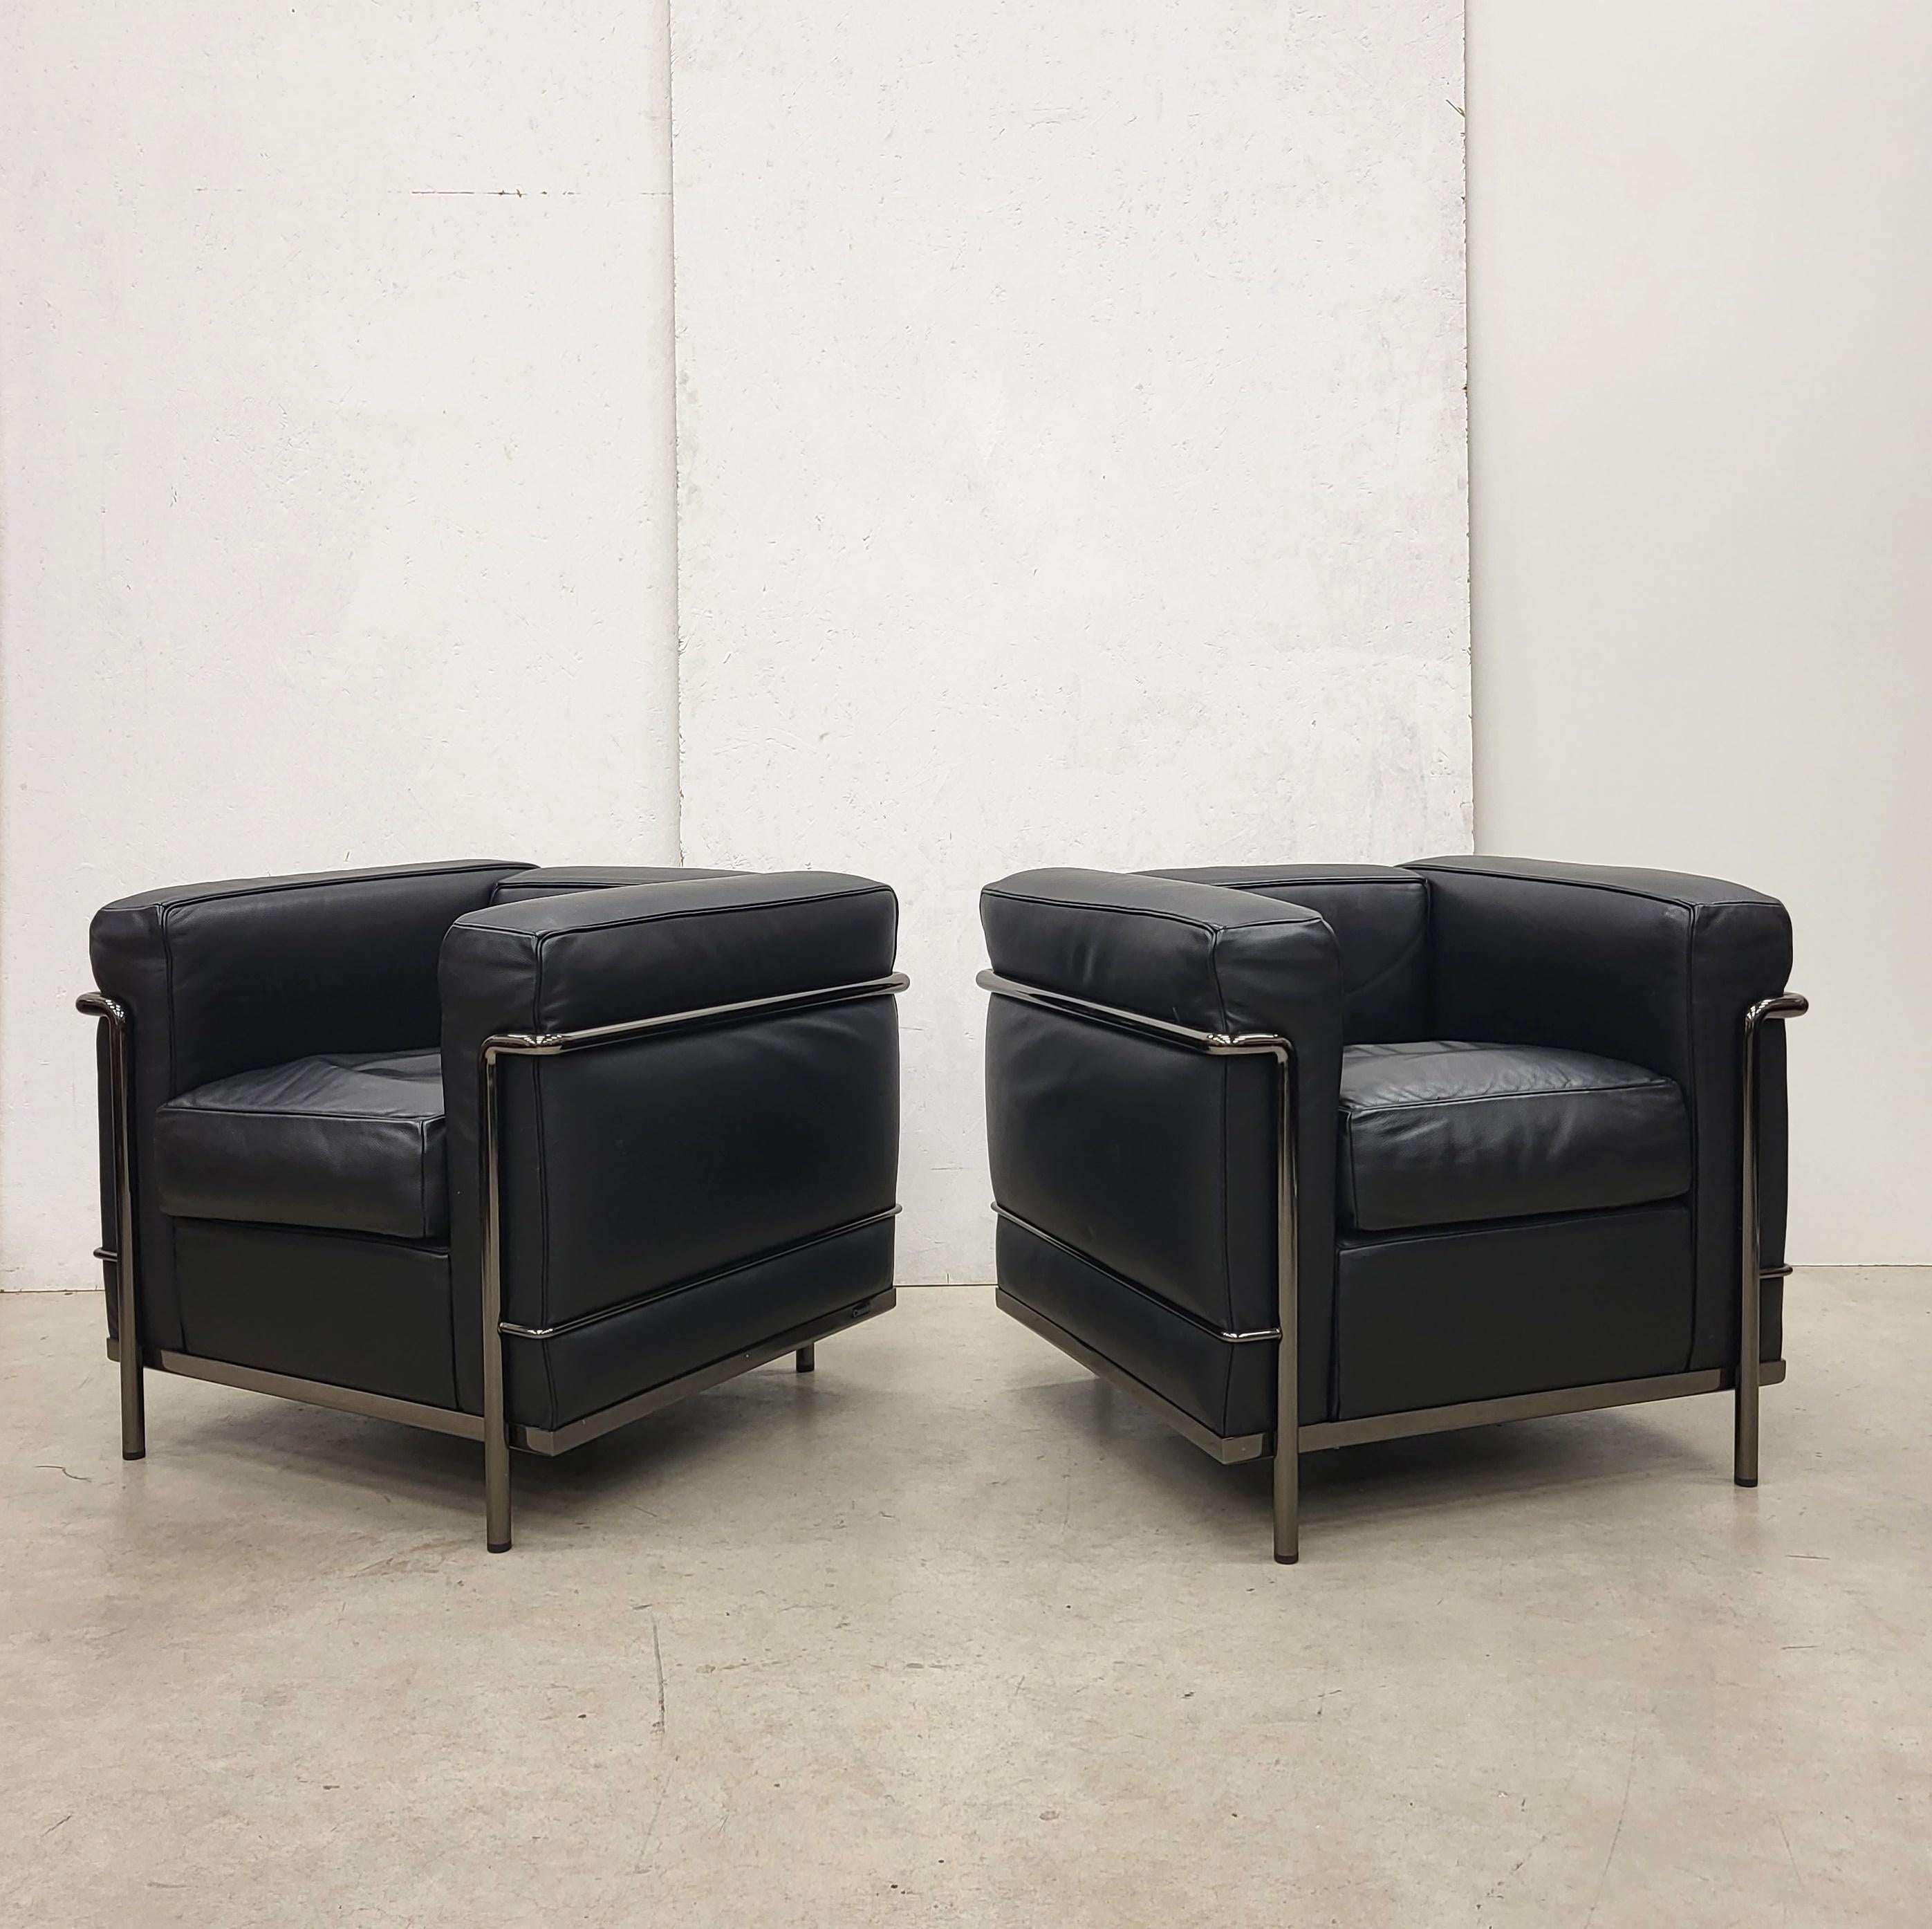 These timeless iconic chairs by Le Corbusier model LC2 were designed in 1928 by Le Corbusier and produced by Cassina in the 2019. These club chairs coming from a special series and having a 